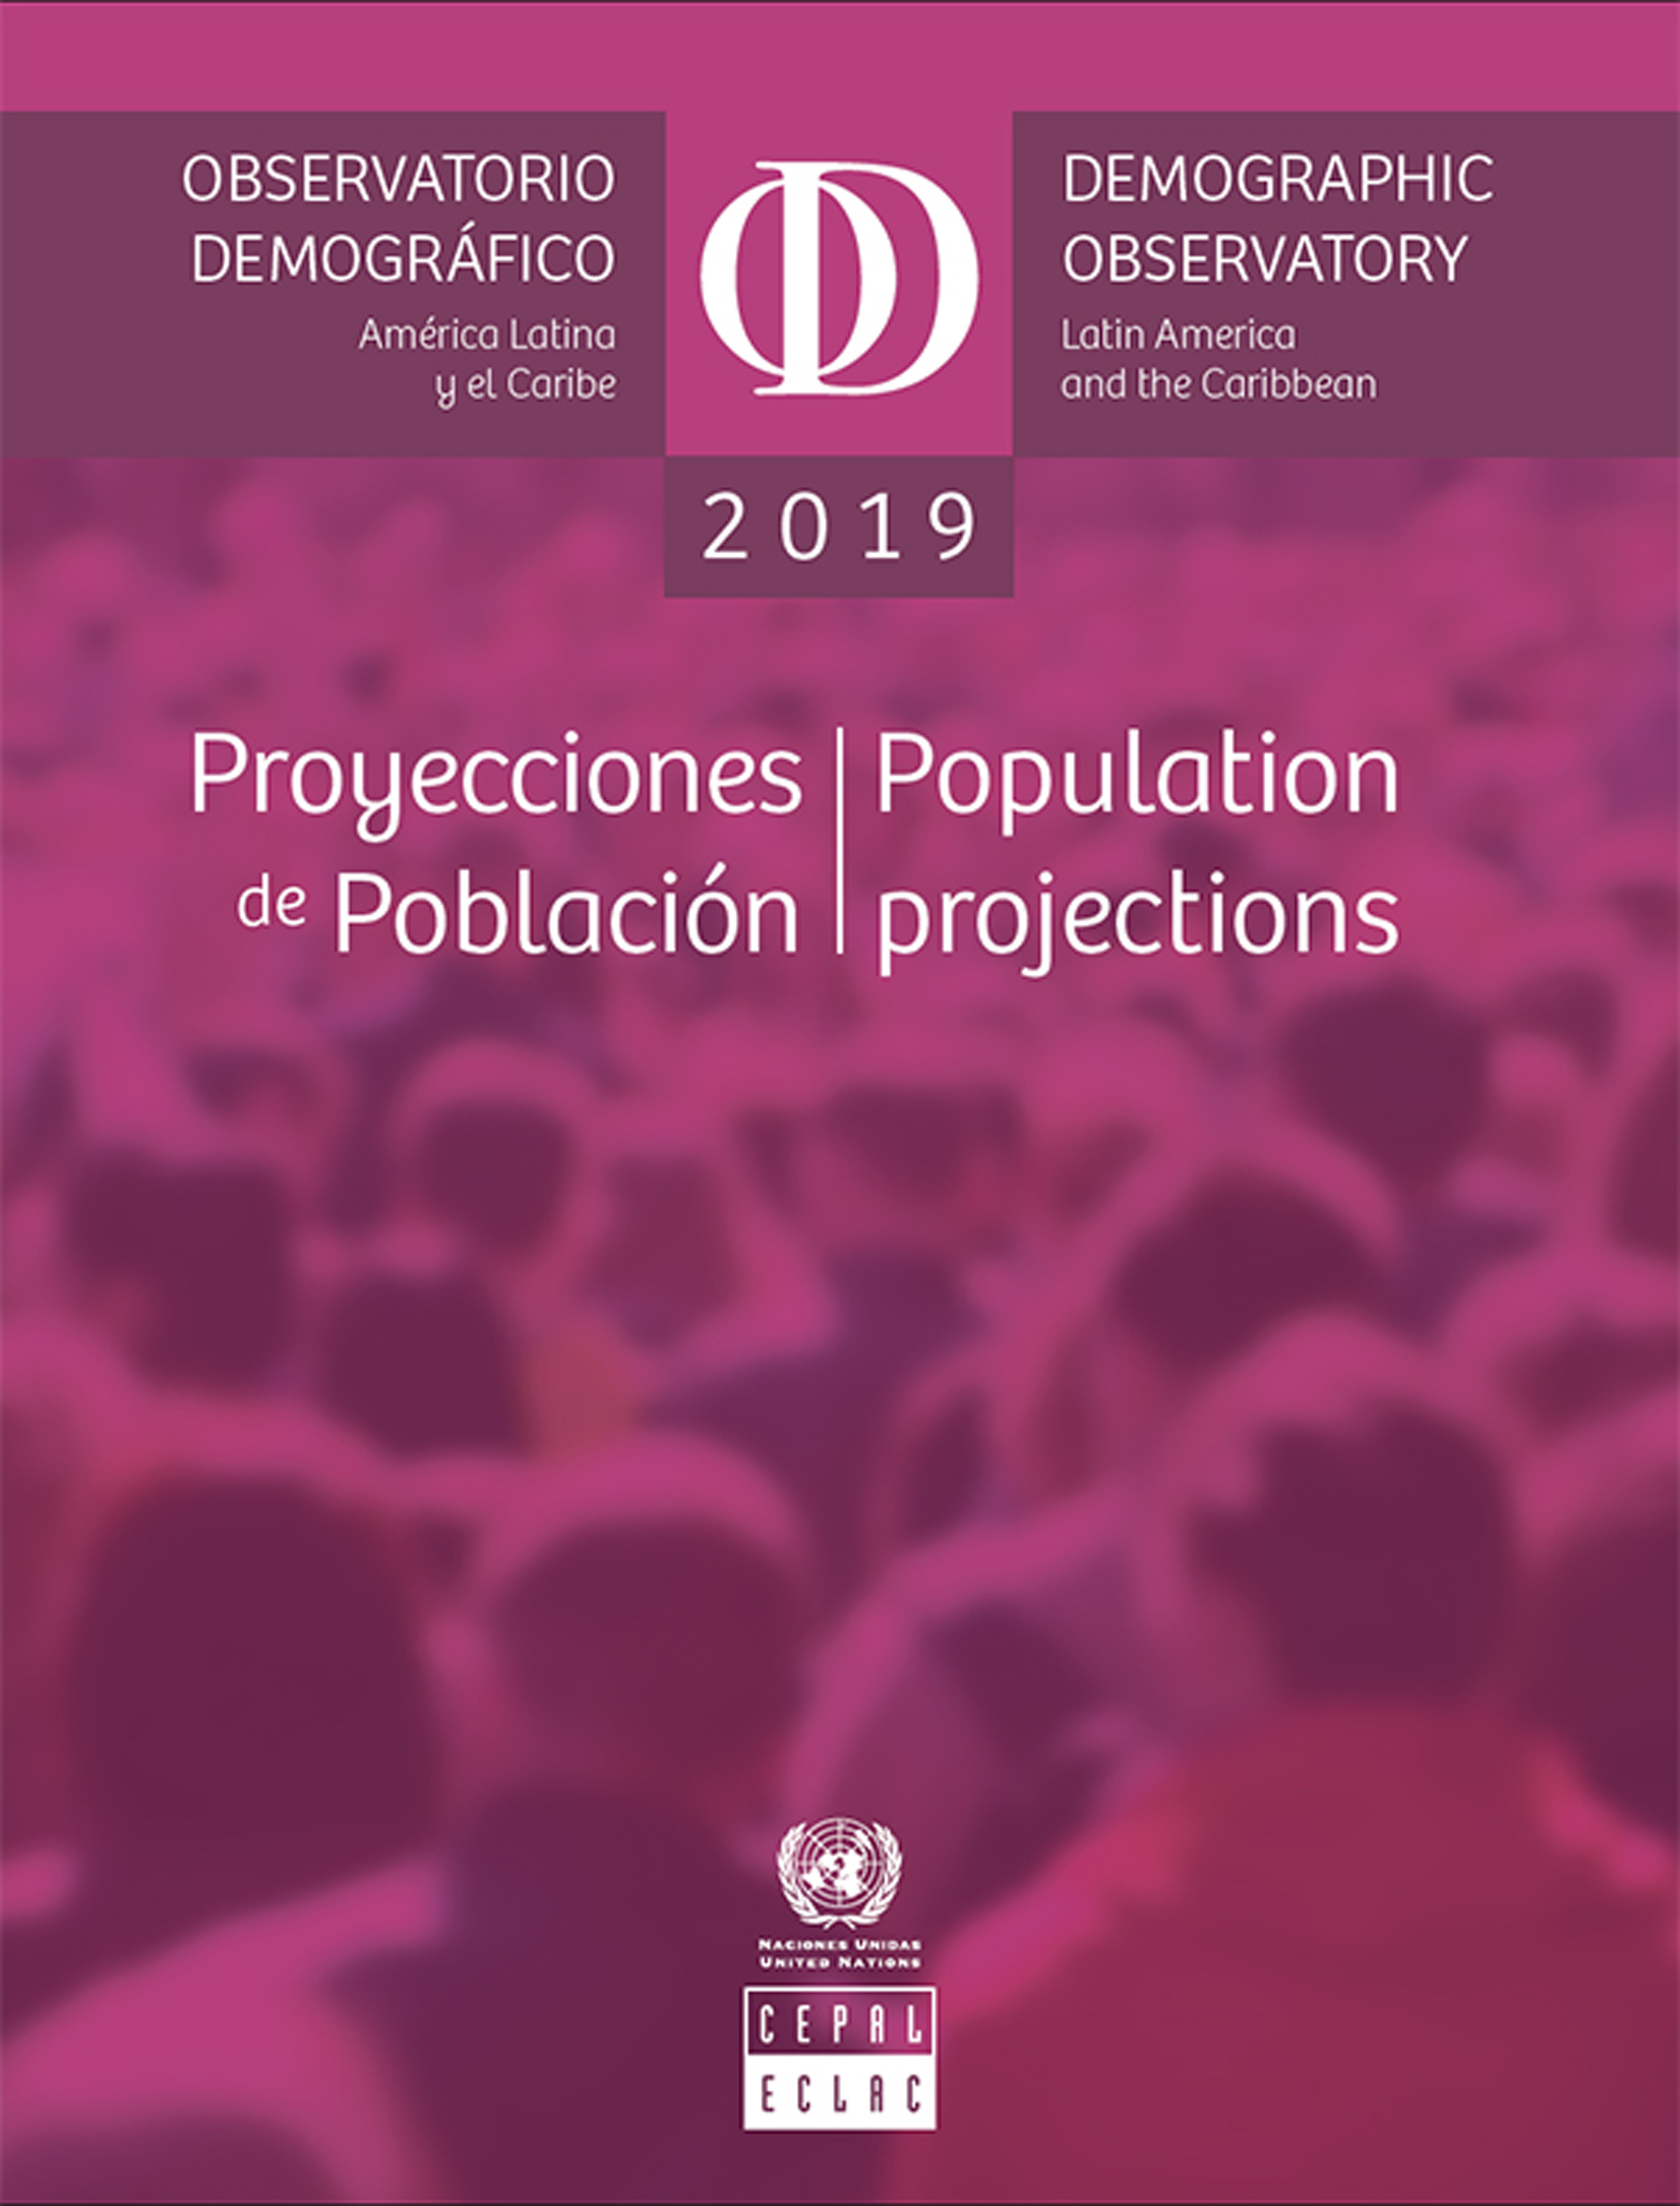 image of Latin America and the Caribbean Demographic Observatory 2019